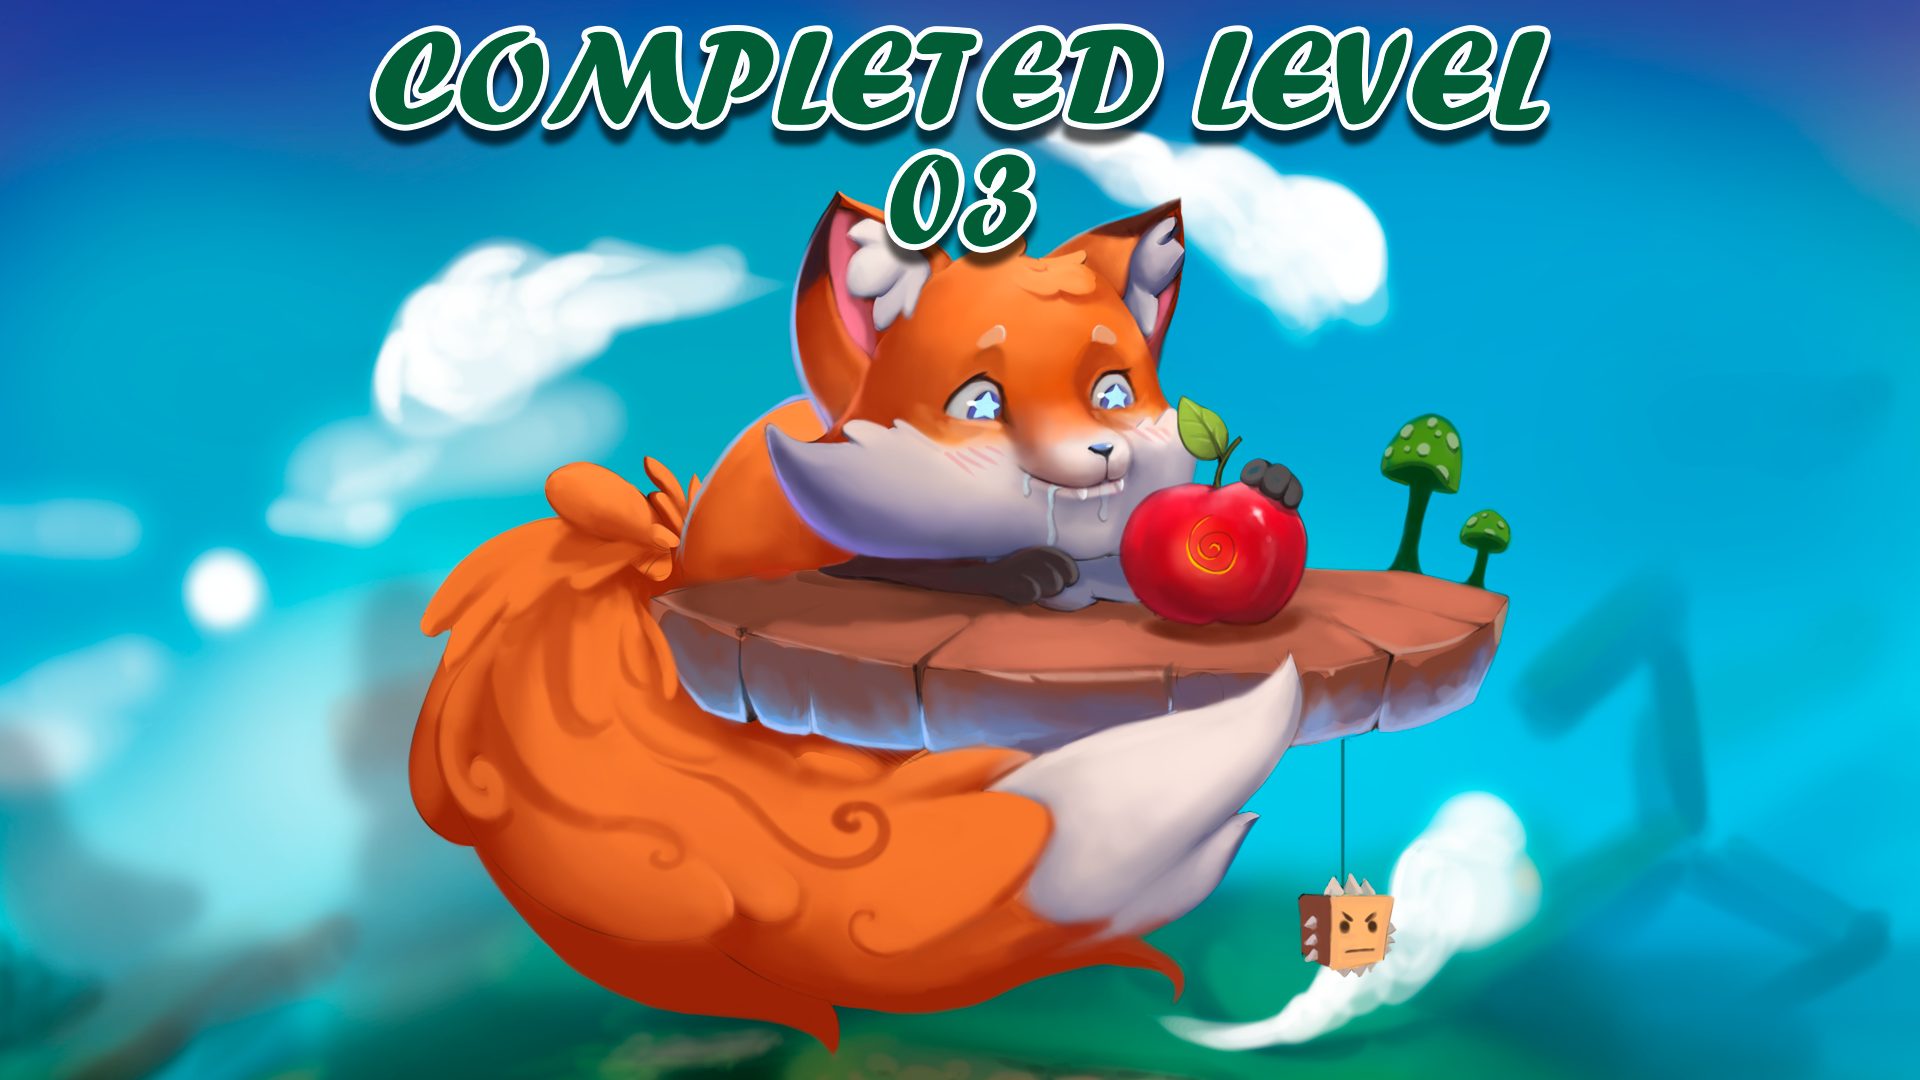 3 levels completed